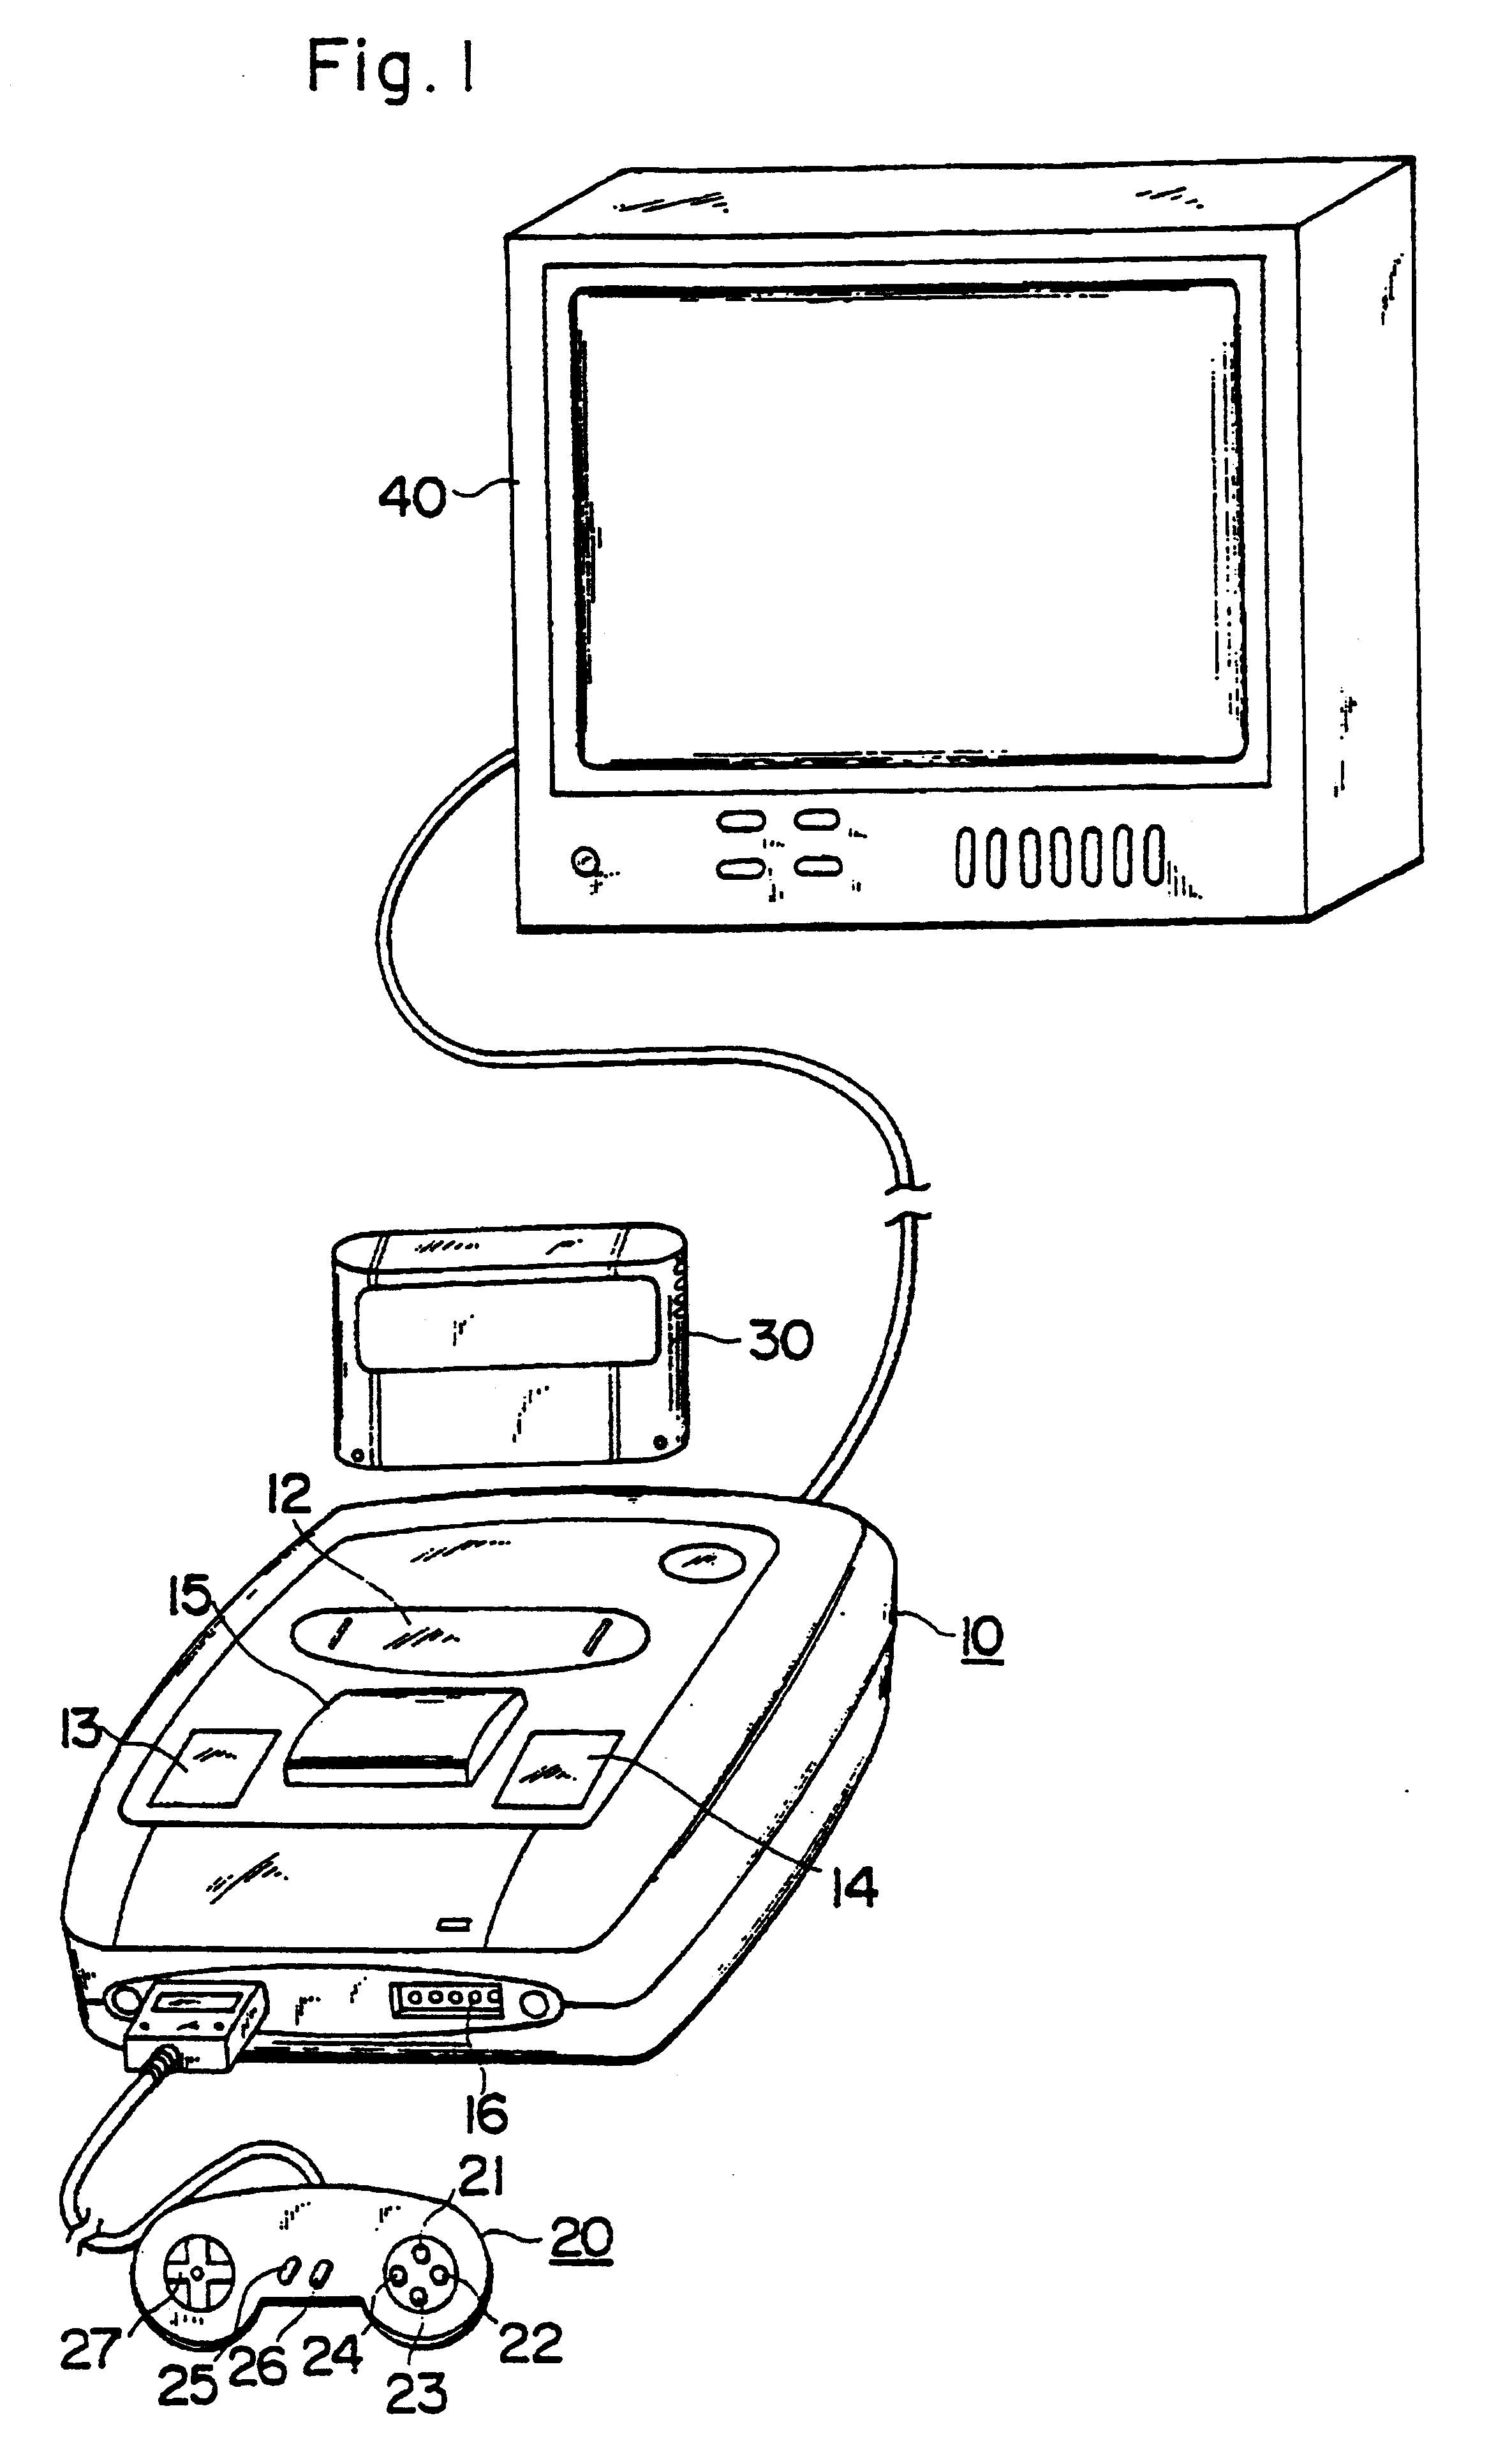 Video game apparatus, method and device for controlling same, and memory cartridge for video games